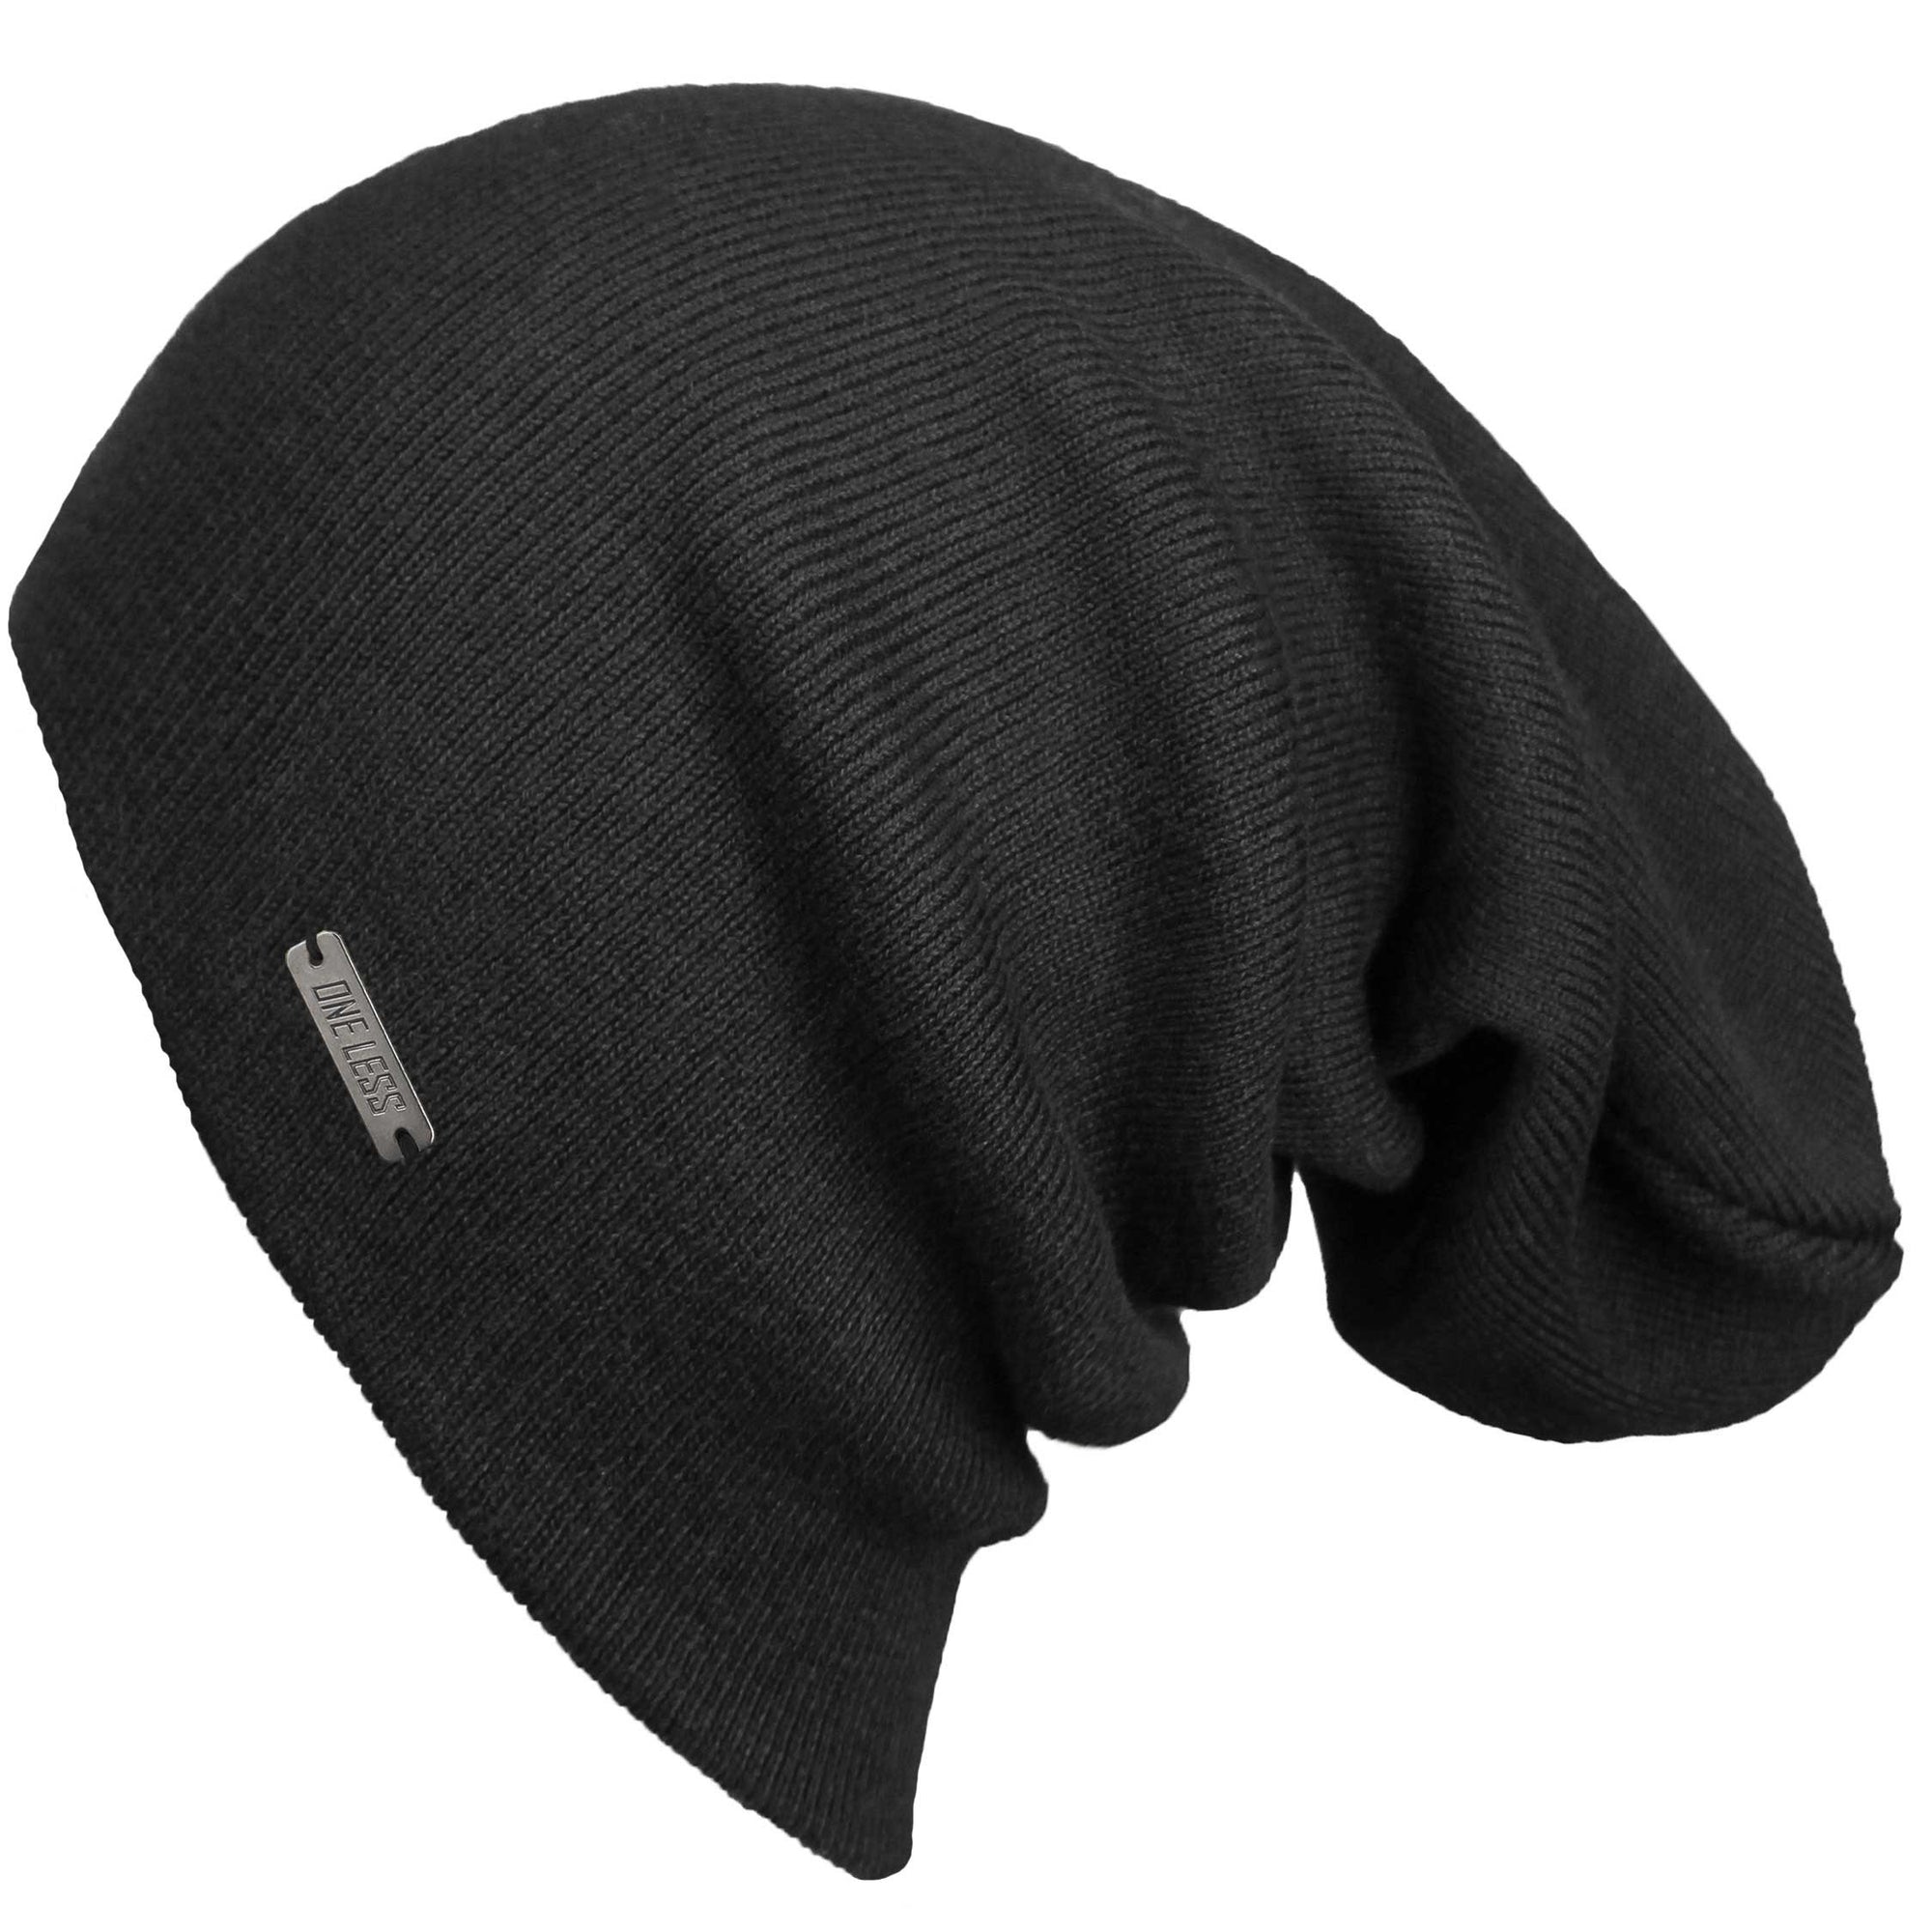 Mens XL Performance - Fifth - The Outlier and Fleece Supply King Beanie Flex